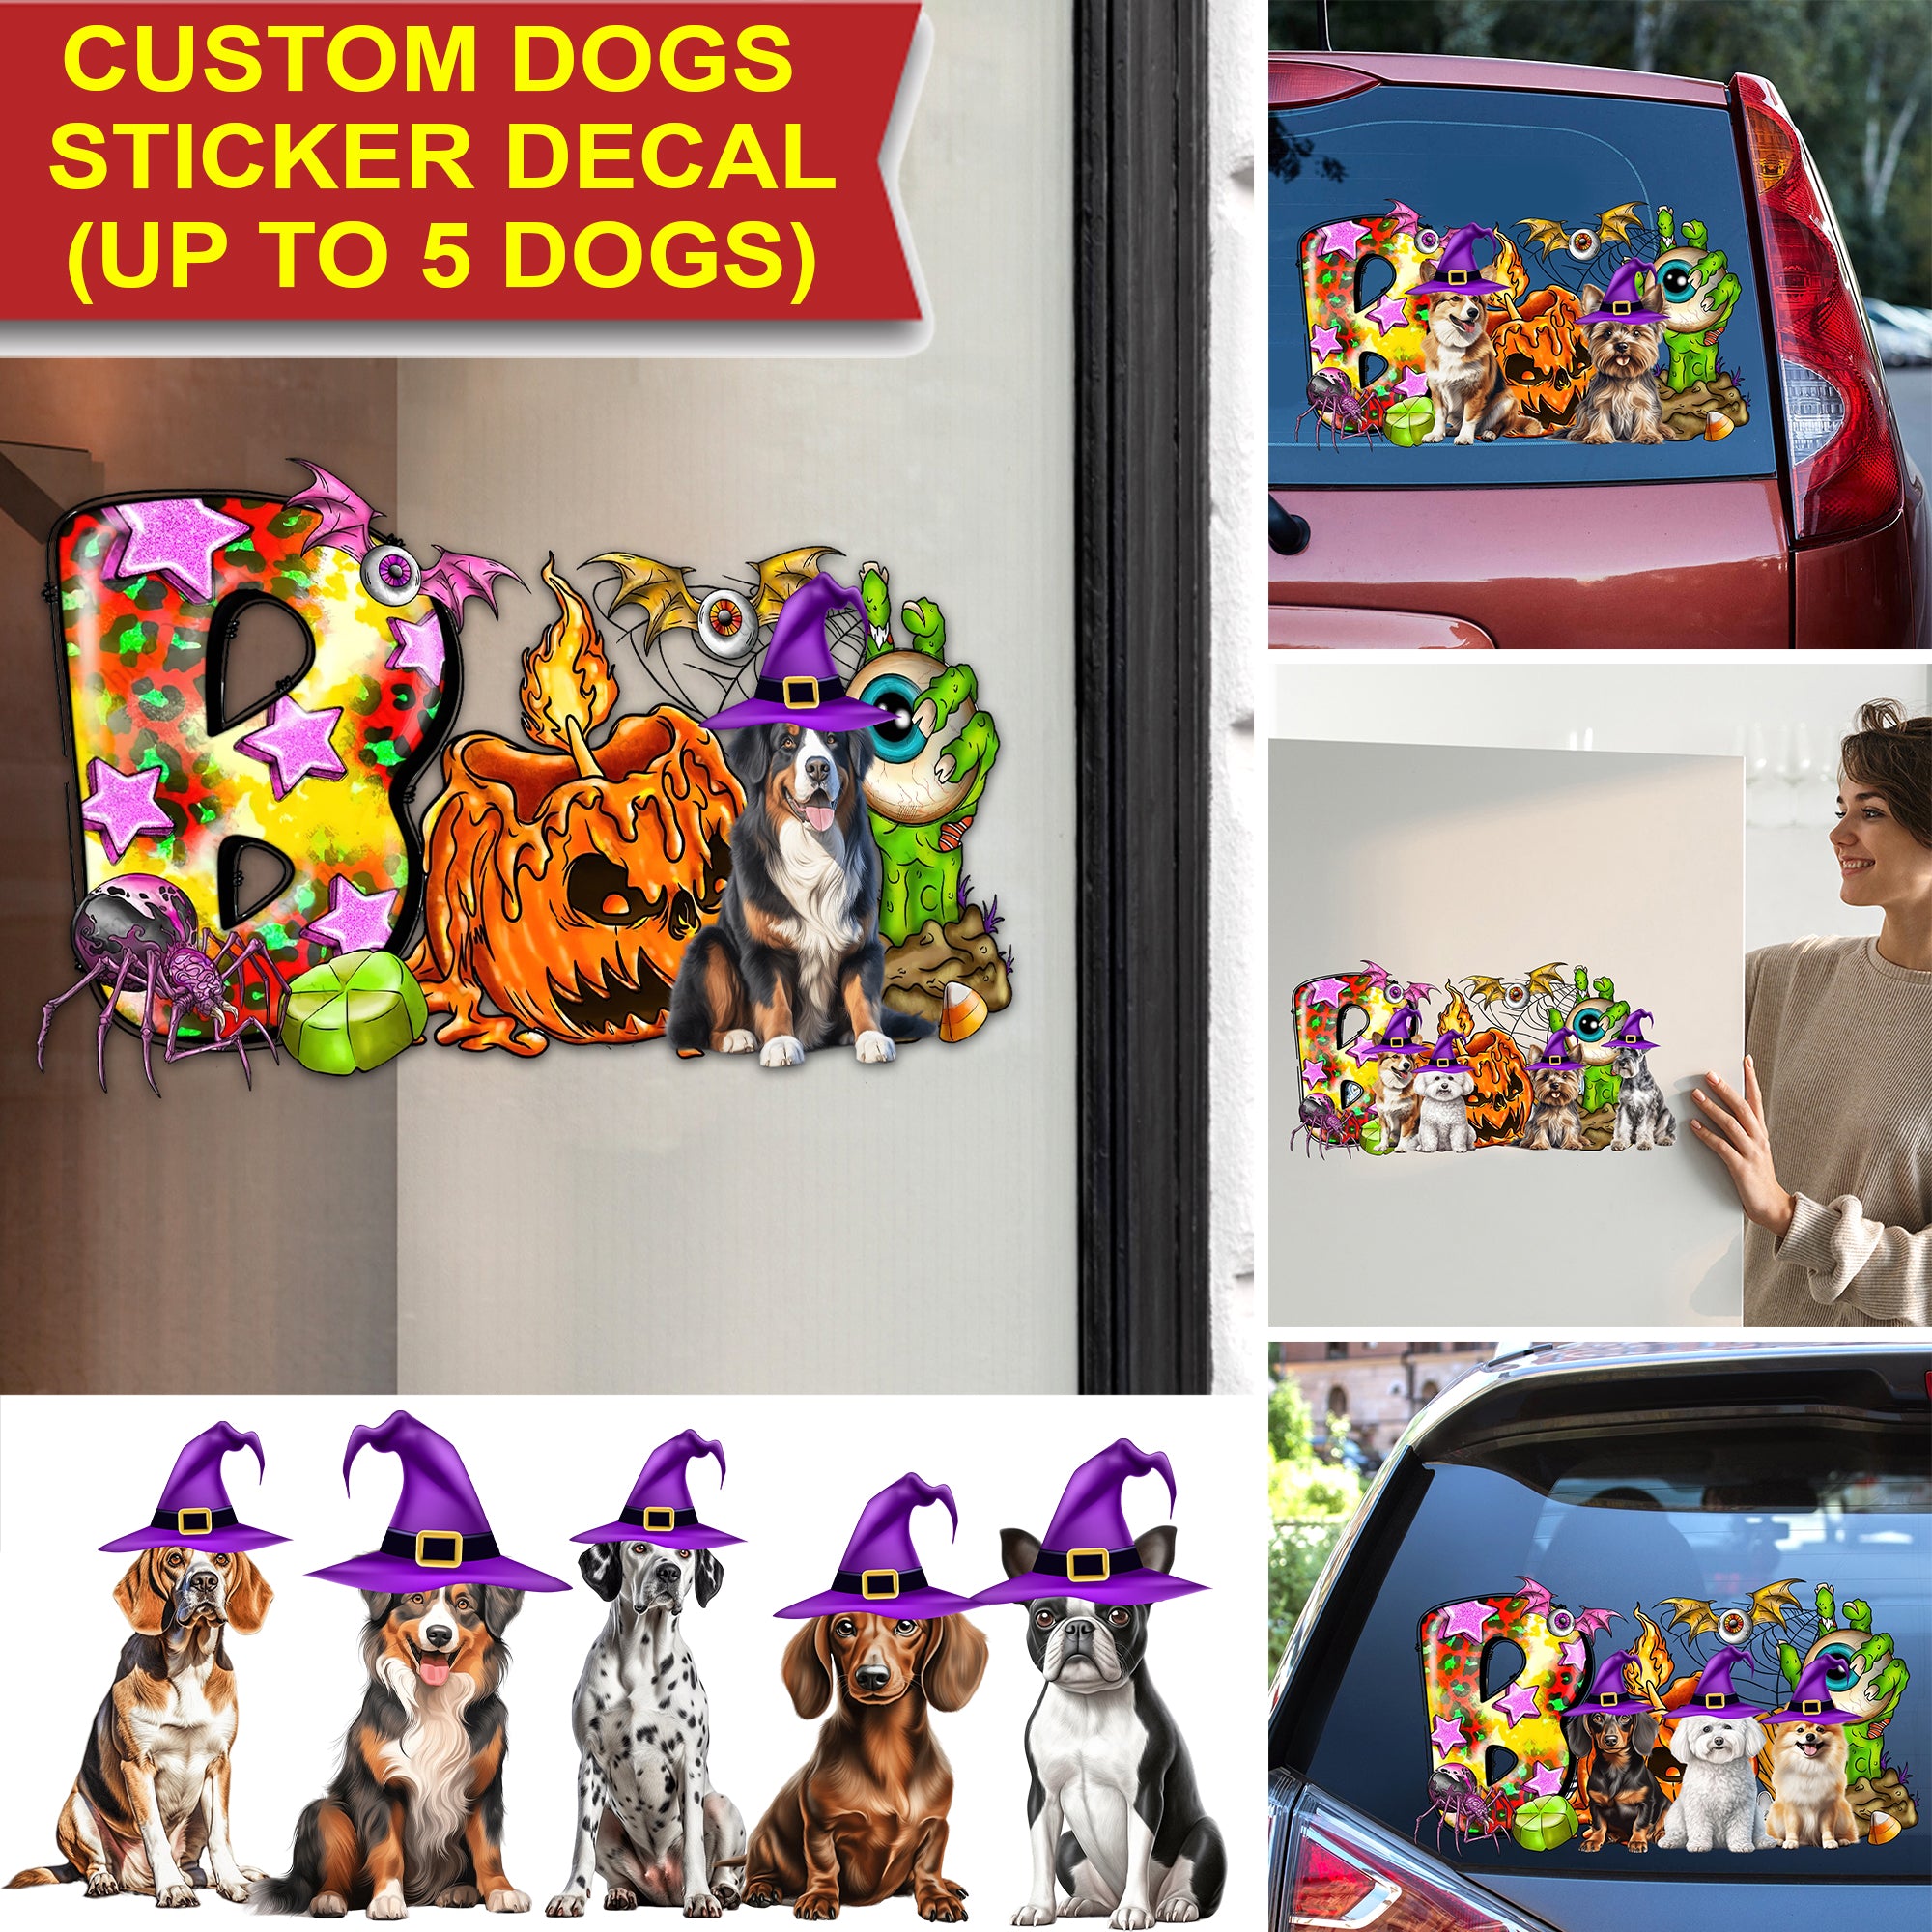 Boo Halloween Dog - Custome Appearance And Name - Personalized Sticker Decal - Gift For Pet Lover, Halloween Gift